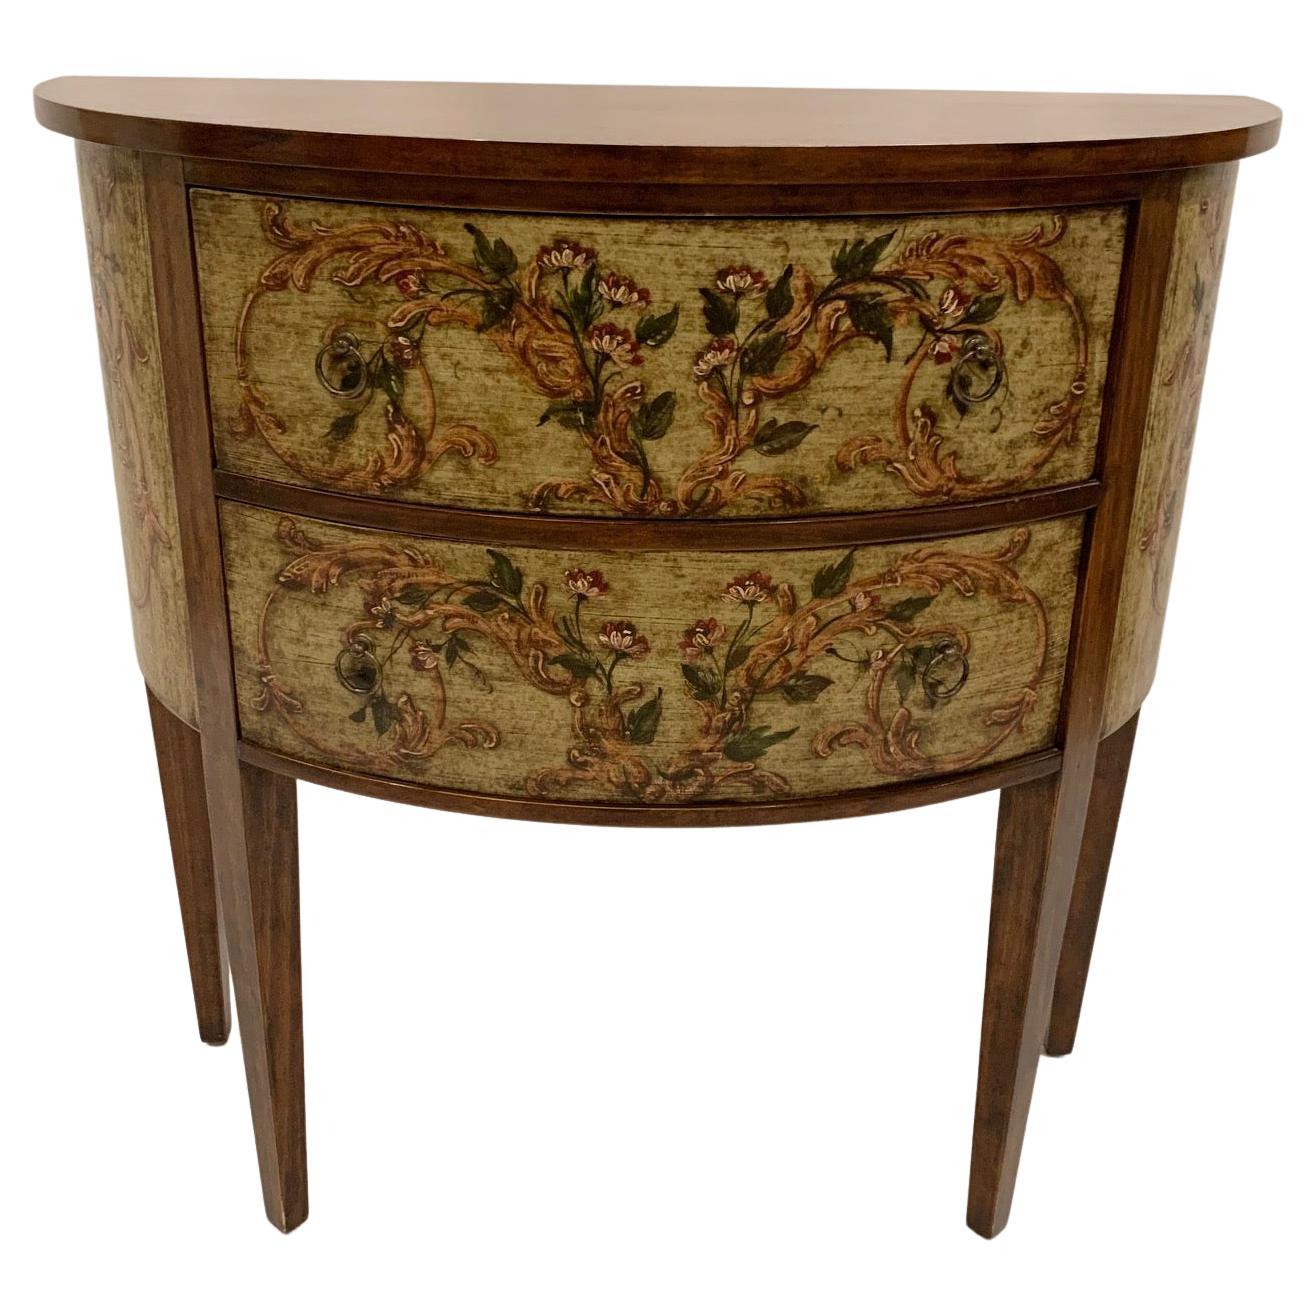 Gorgeous Italian Fruitwood Demilune Console with Pretty Painted Decoration